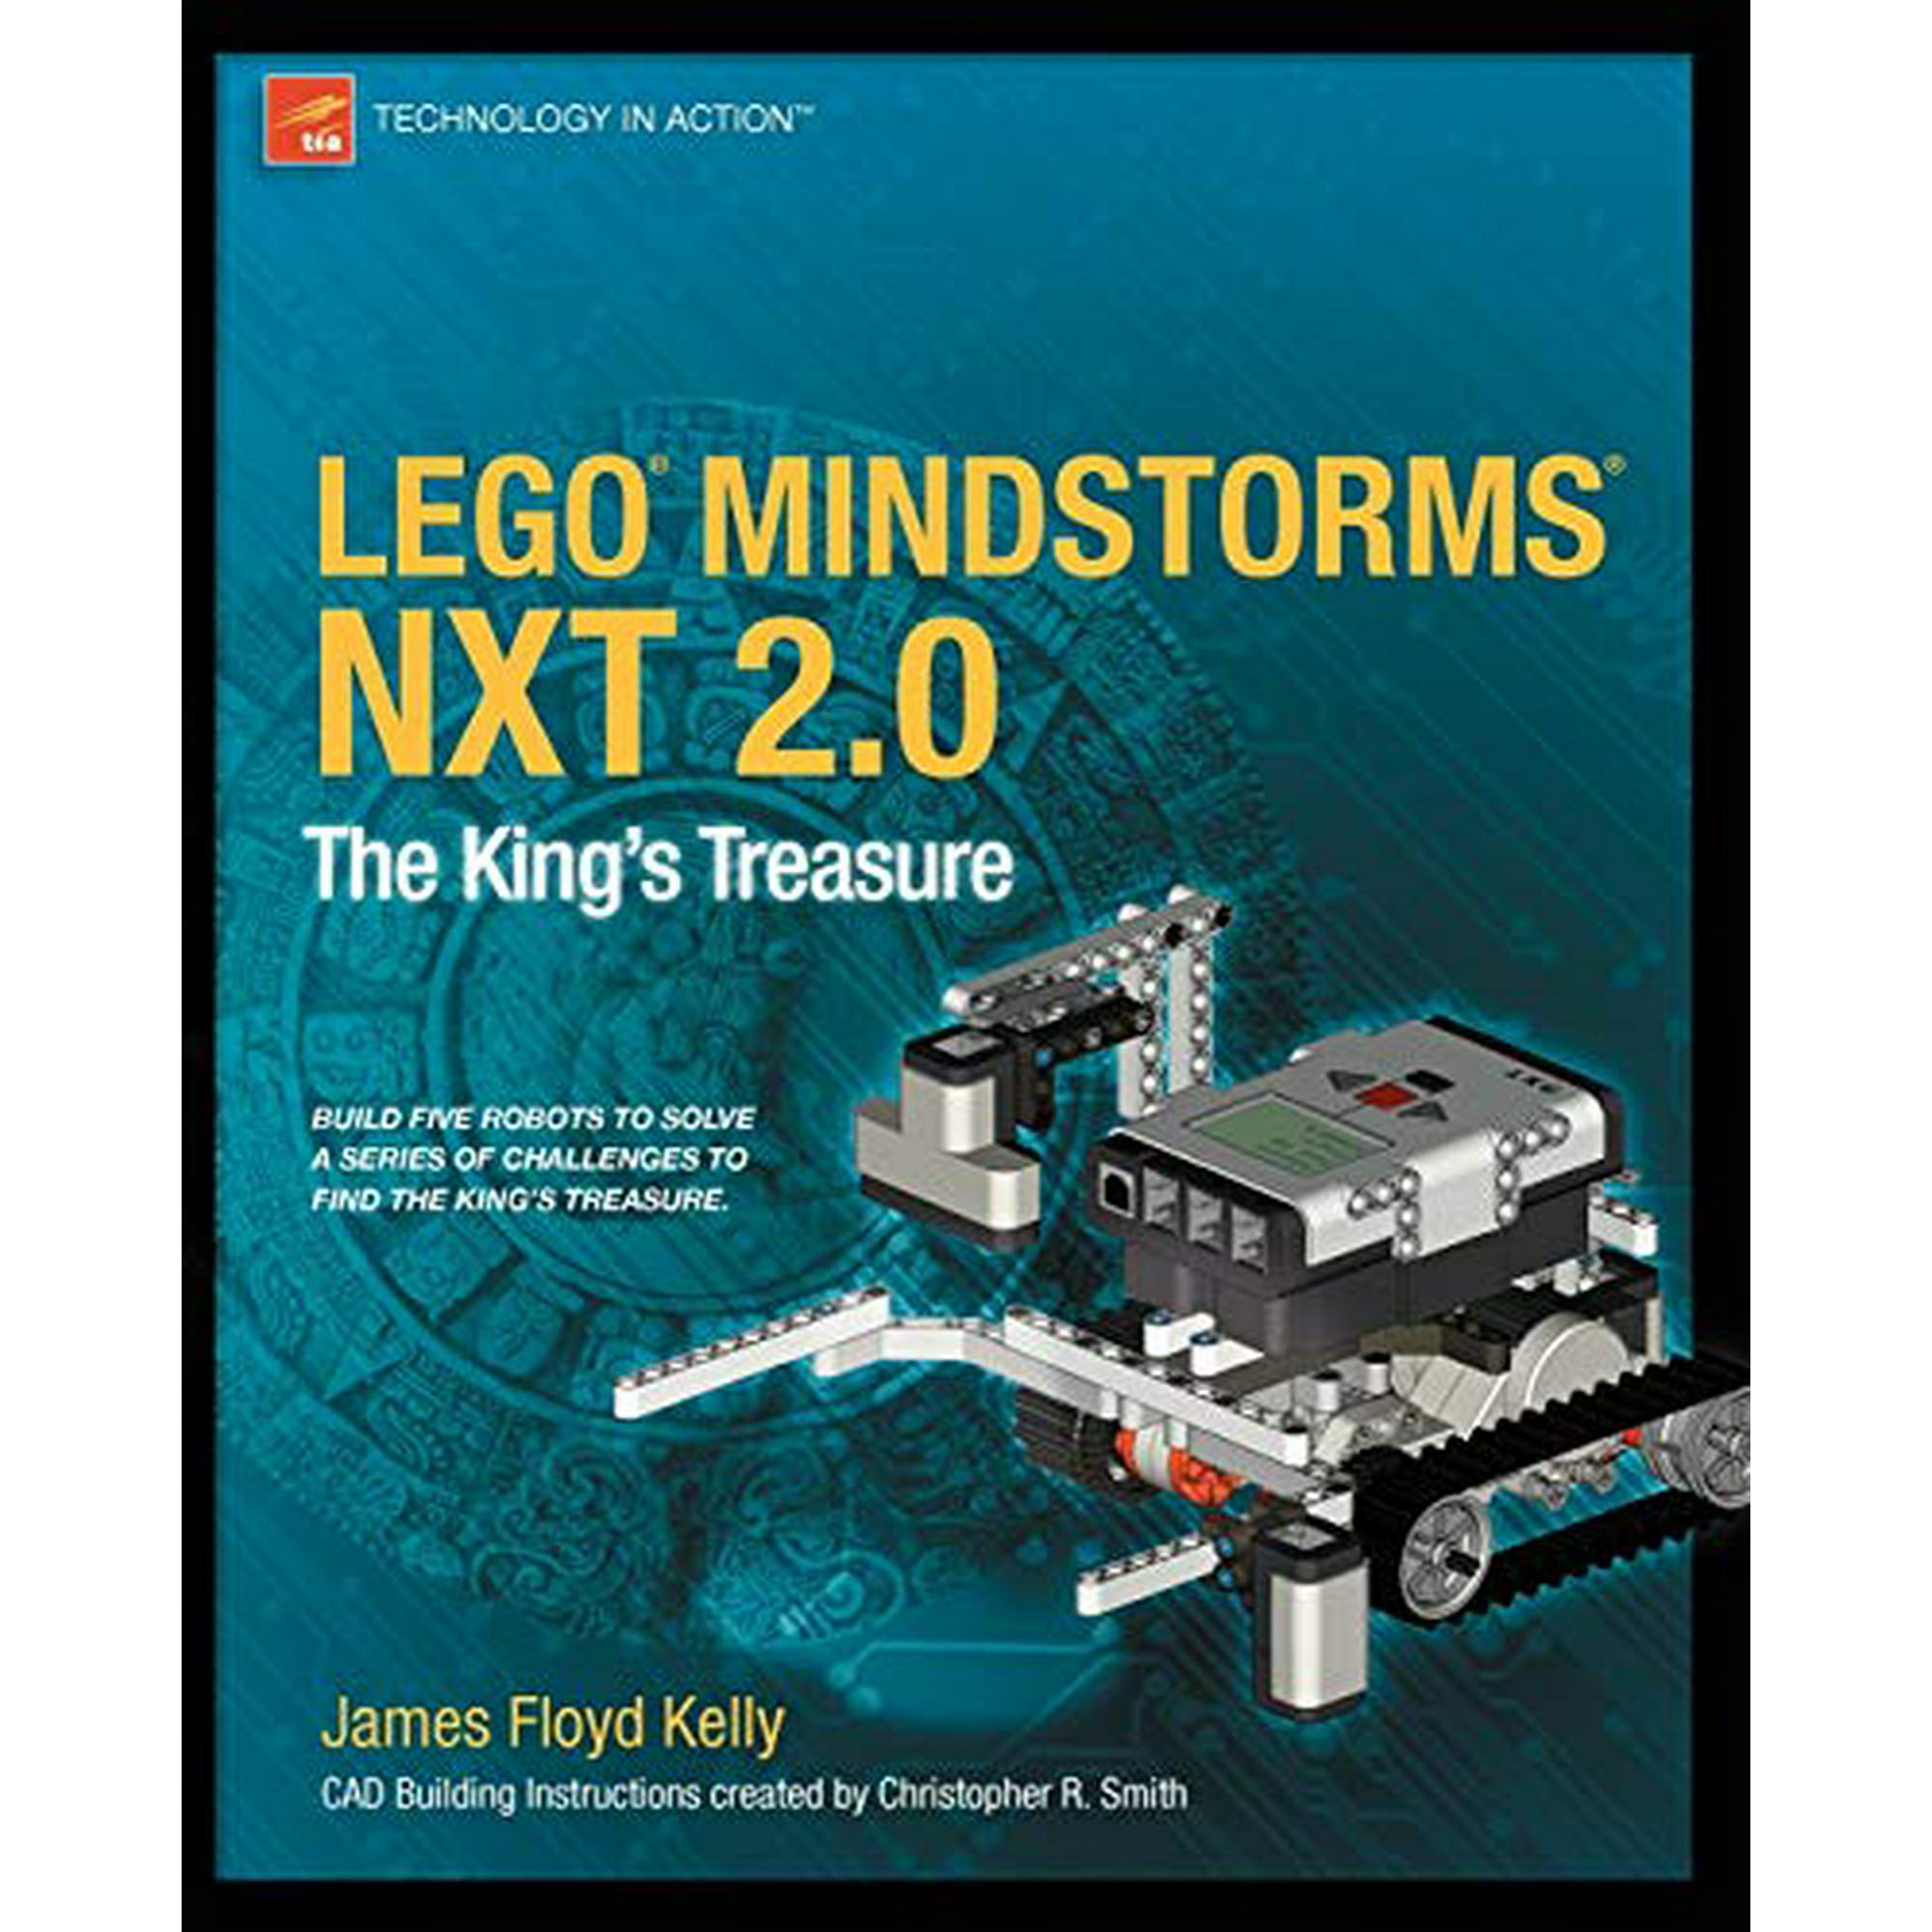 LEGO MINDSTORMS NXT : The King's Treasure (Technology in Action) |  Walmart Canada